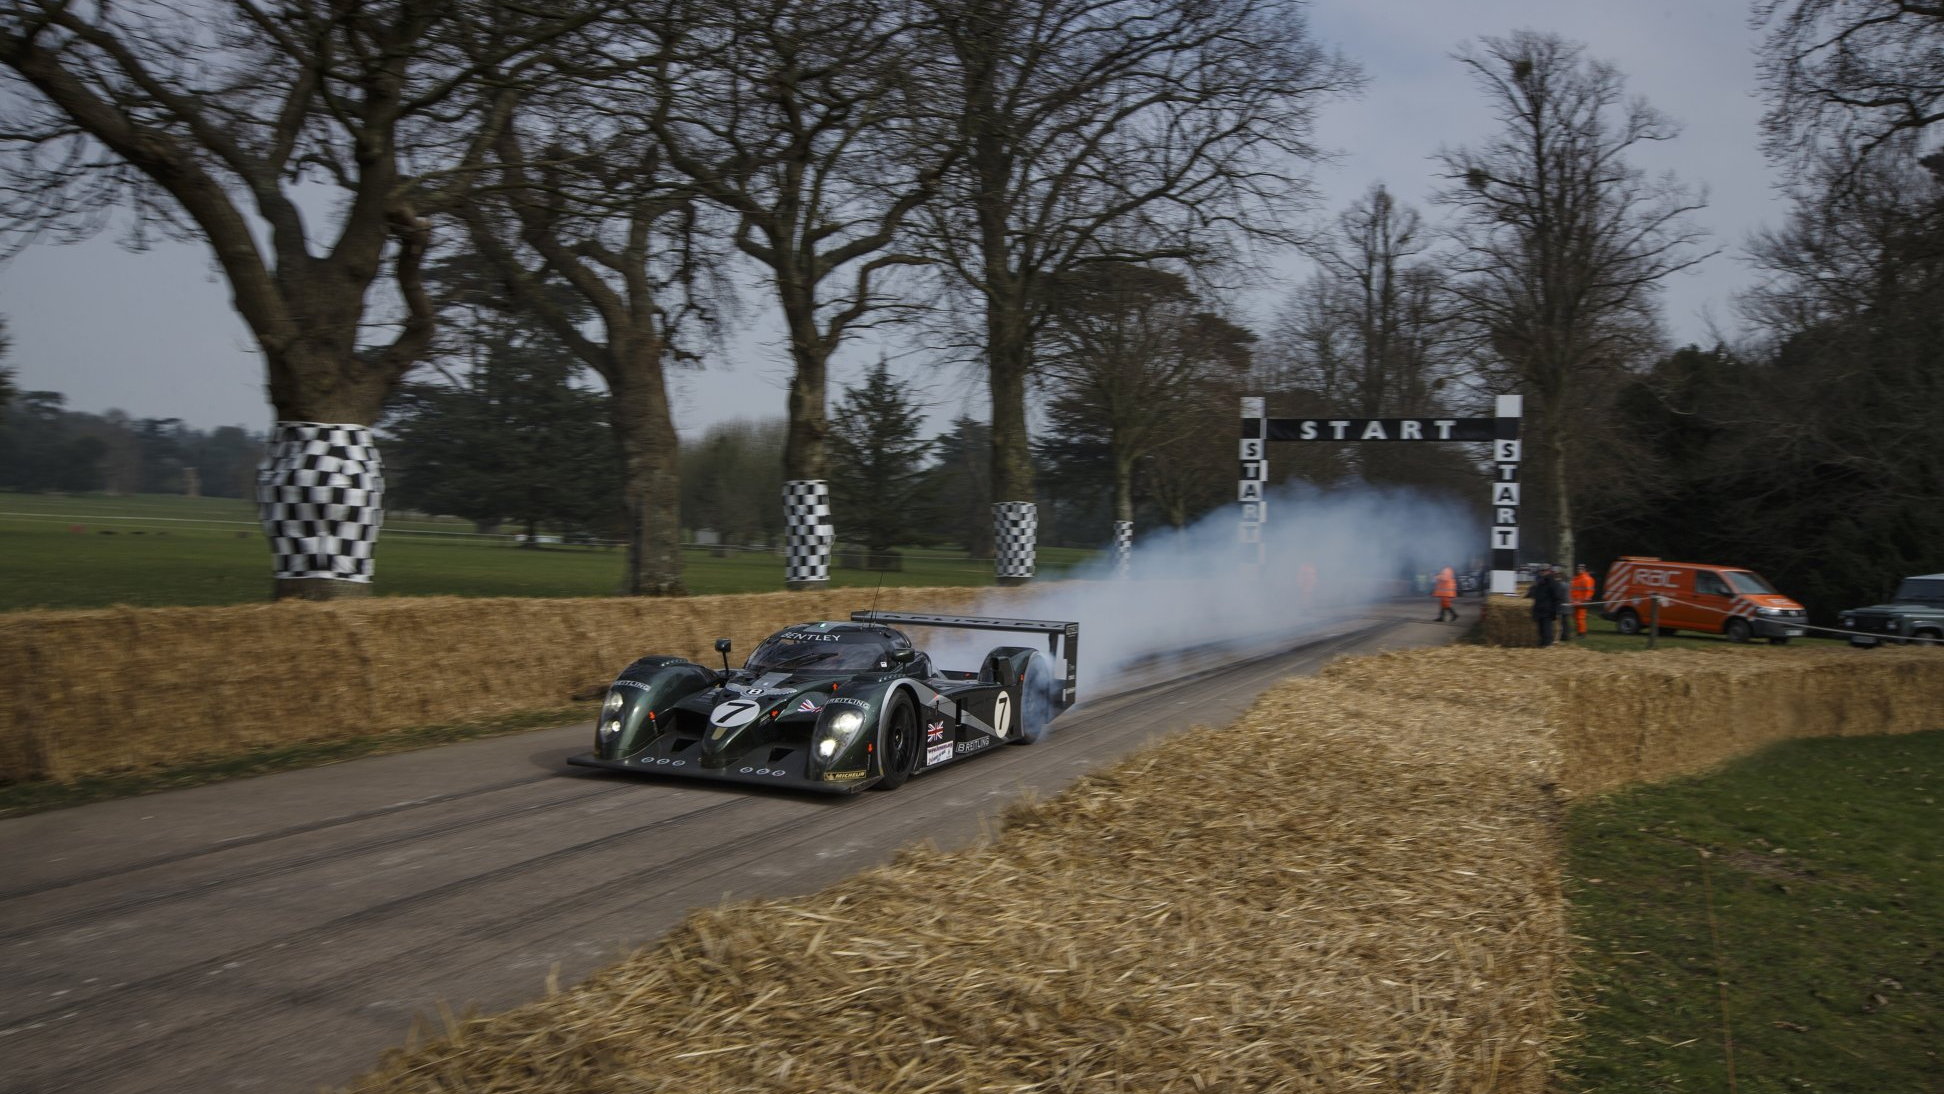 The Bentley Speed 8 at the Goodwood Festival of Speed - image: Bentley